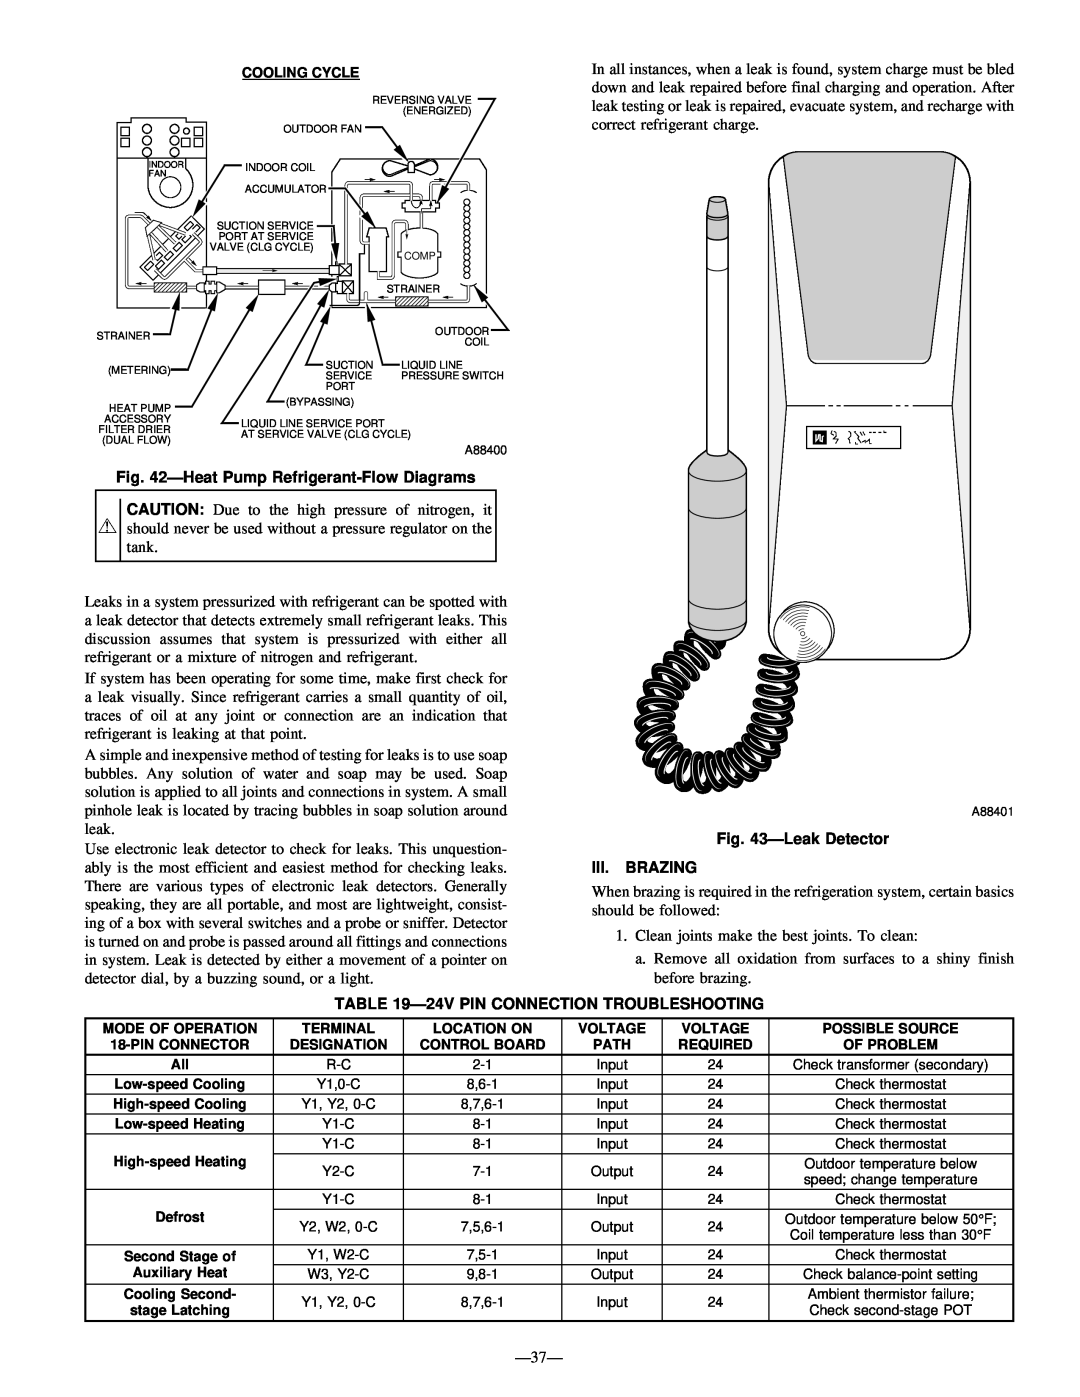 Bryant R-22 service manual HeatPump Refrigerant-FlowDiagrams, LeakDetector III. BRAZING, 24VPIN CONNECTION TROUBLESHOOTING 